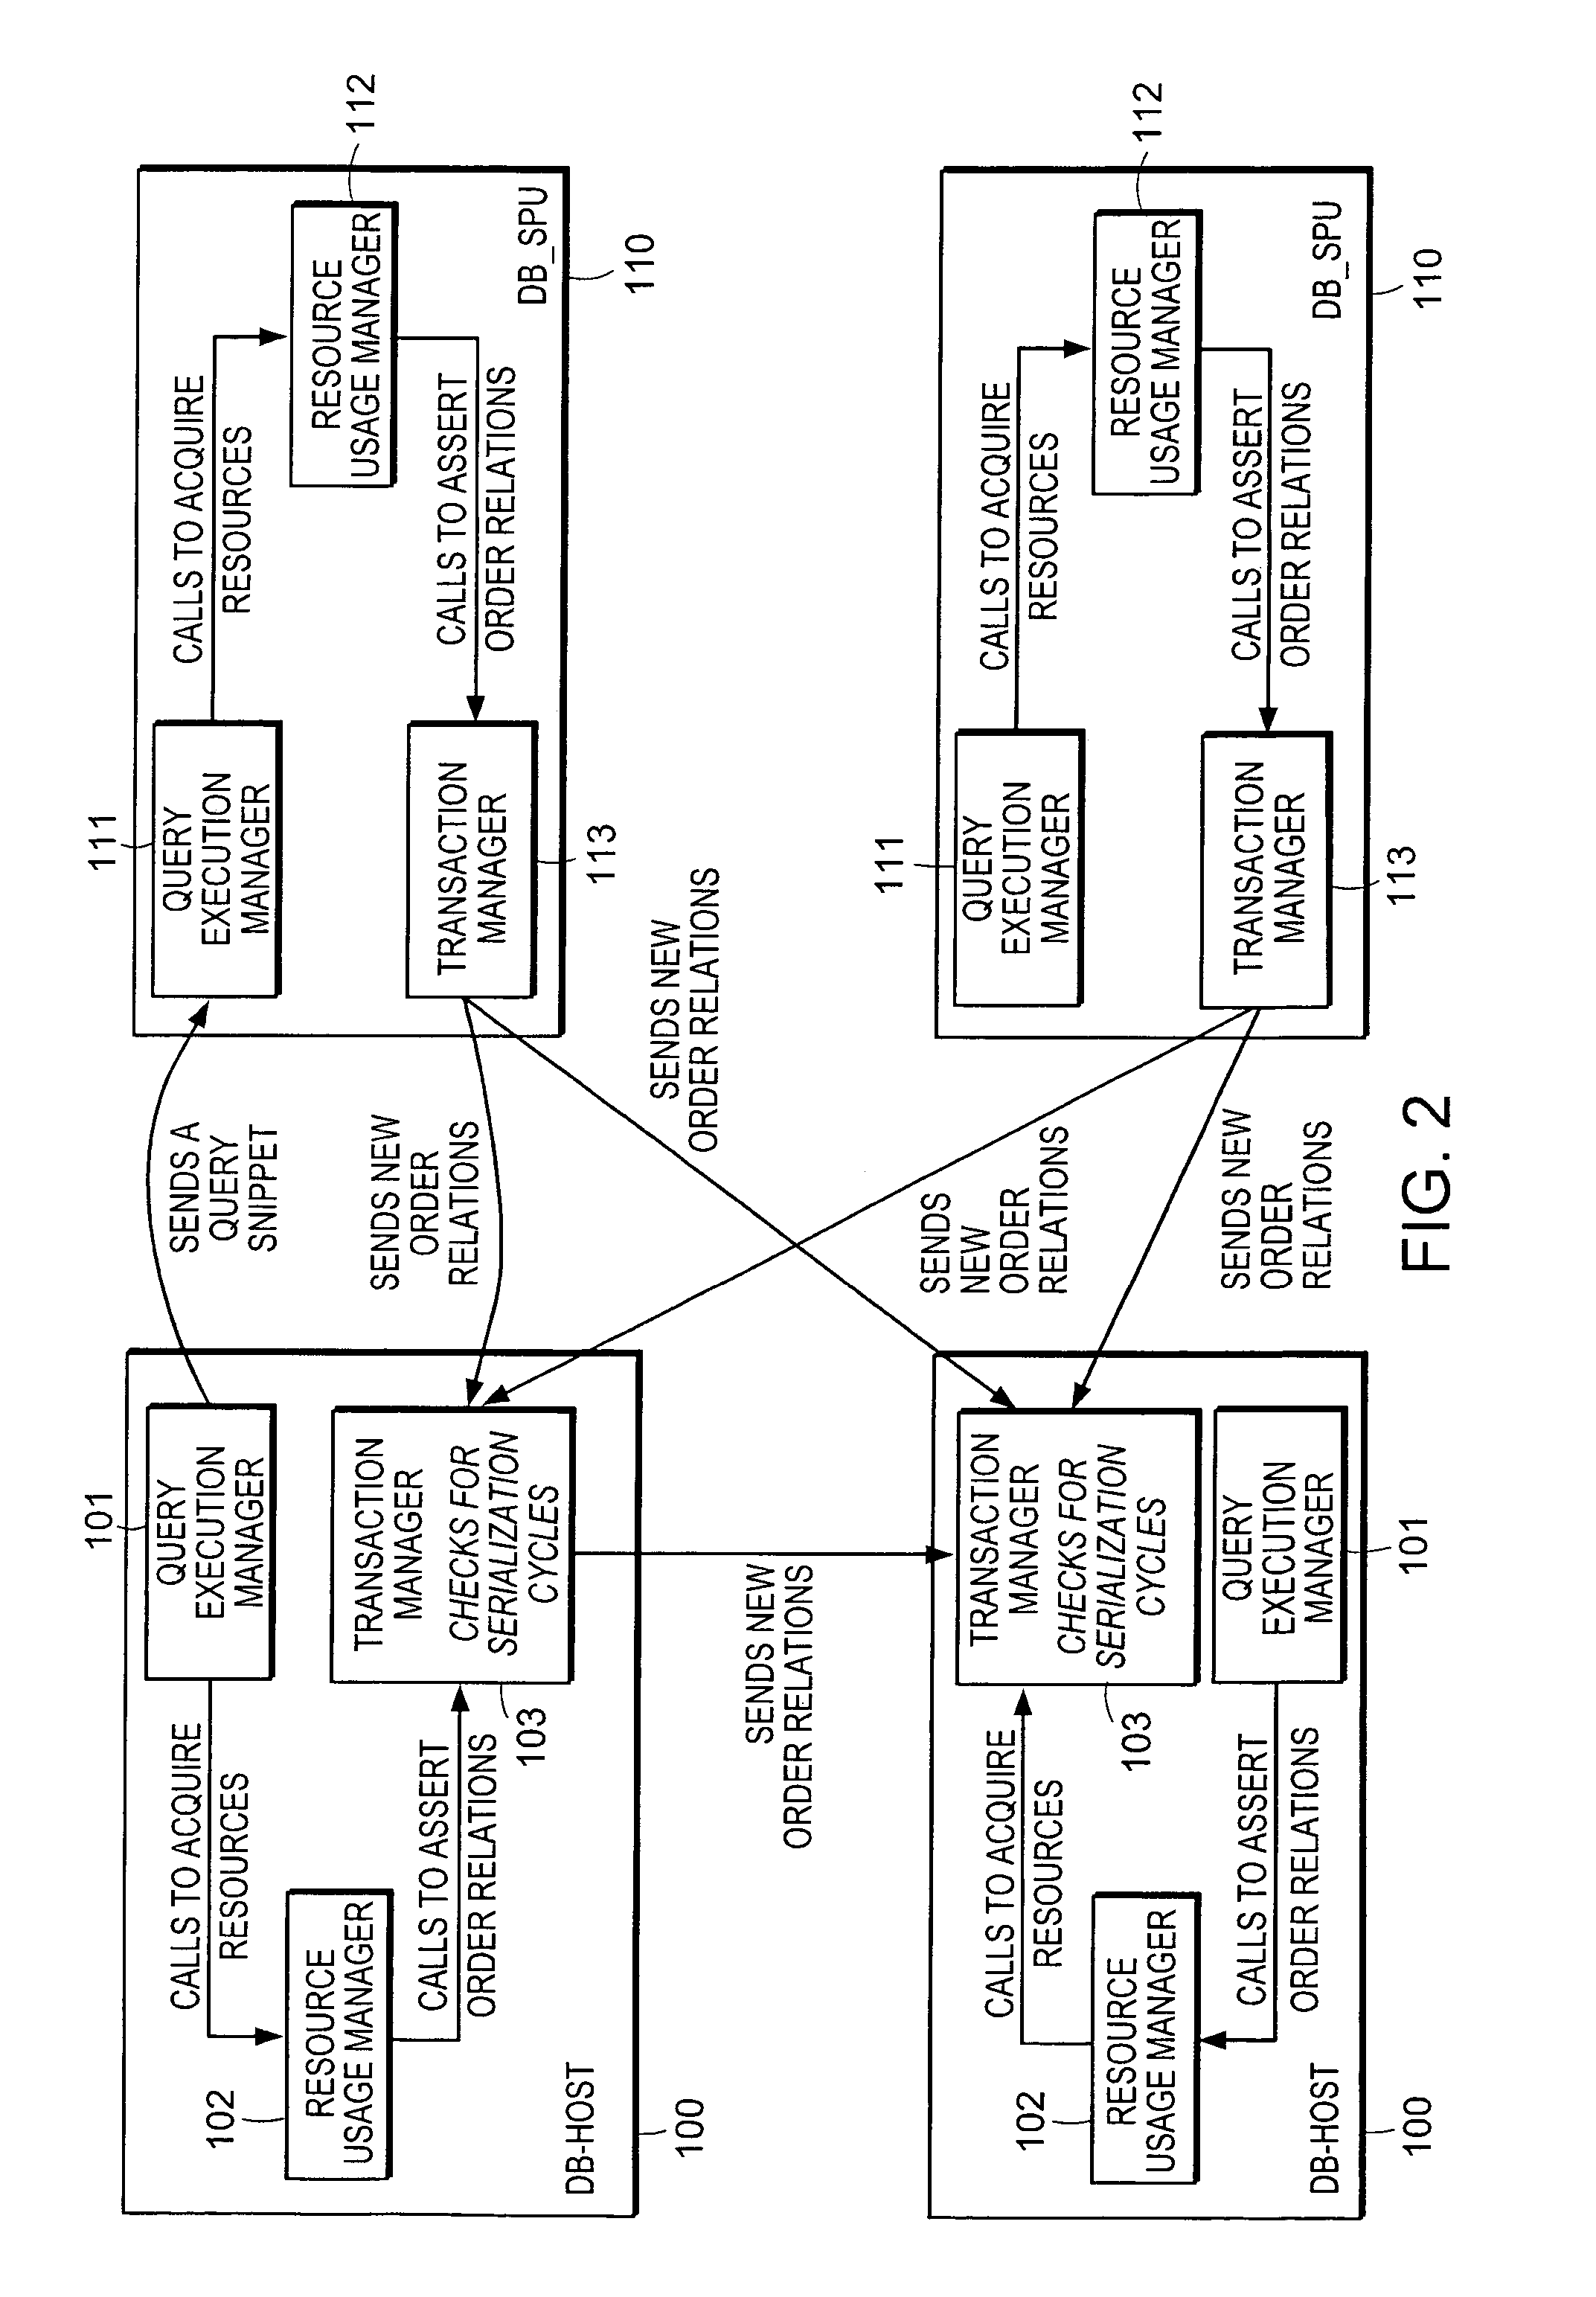 Computer method and system for concurrency control using dynamic serialization ordering